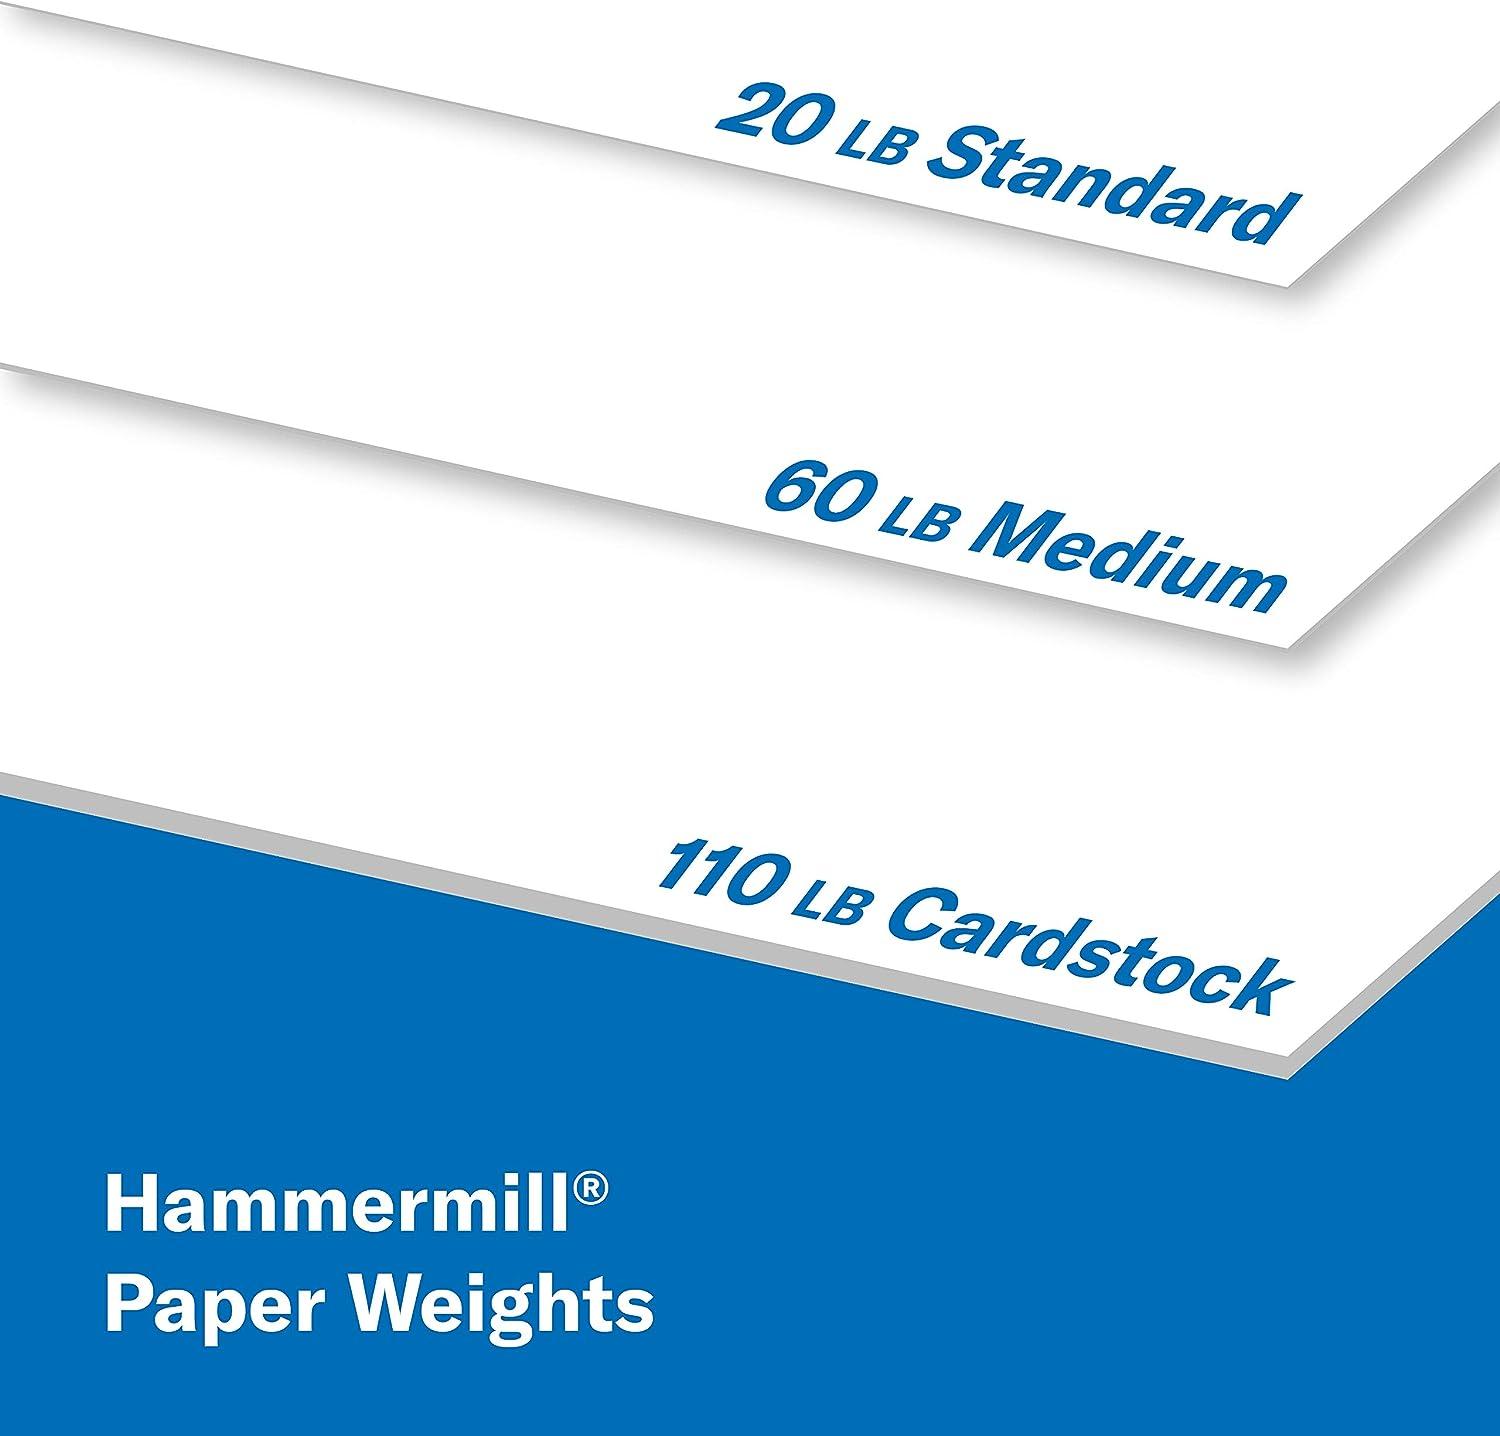 Hammermill White Cardstock 110 Lb 8.5 x 11 Colored Cardstock 1 Pack (200  Sheets) - Thick Card Stock Made in the USA 168380R 1 Pack